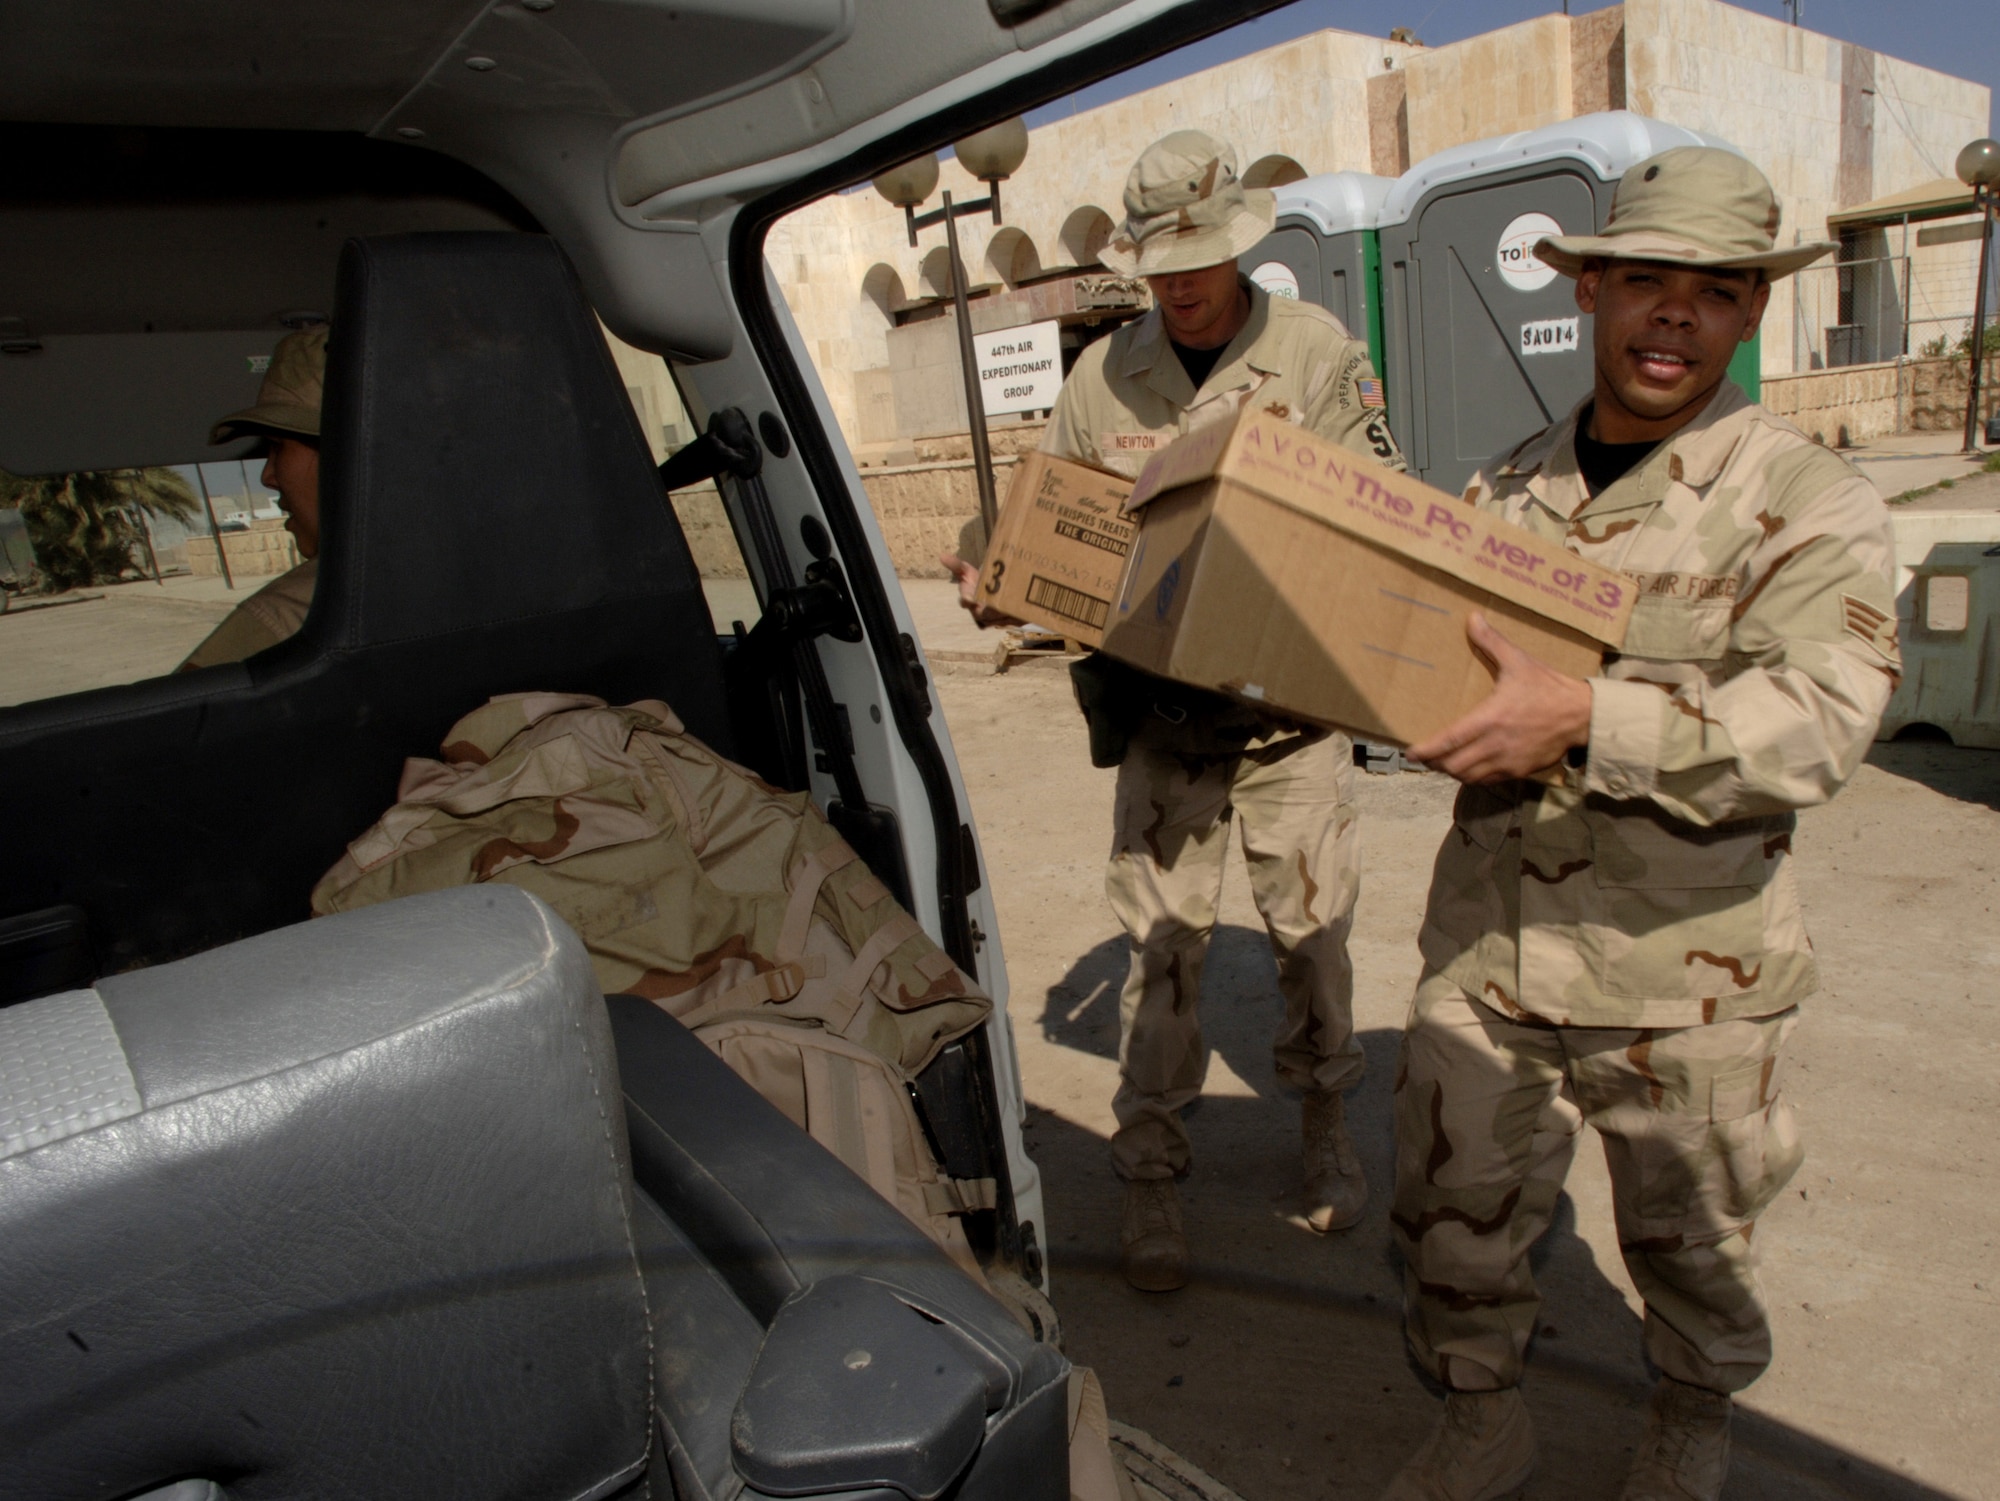 Senior Airman Argenis Sambois carries a box full of toys, candy and school supplies for the children he will see at the Radhwaniya Medical Clinic Outreach Program. Airman Sambois is assigned to the 447th Expeditionary Civil Engineer Squadron at Sather Air Base, Iraq. Several times a week, volunteers meet at the facility on the edge of the Baghdad International Airport, and support the medical needs of civilians. (U.S. Air Force photo/Master Sgt. Lance Cheung)

